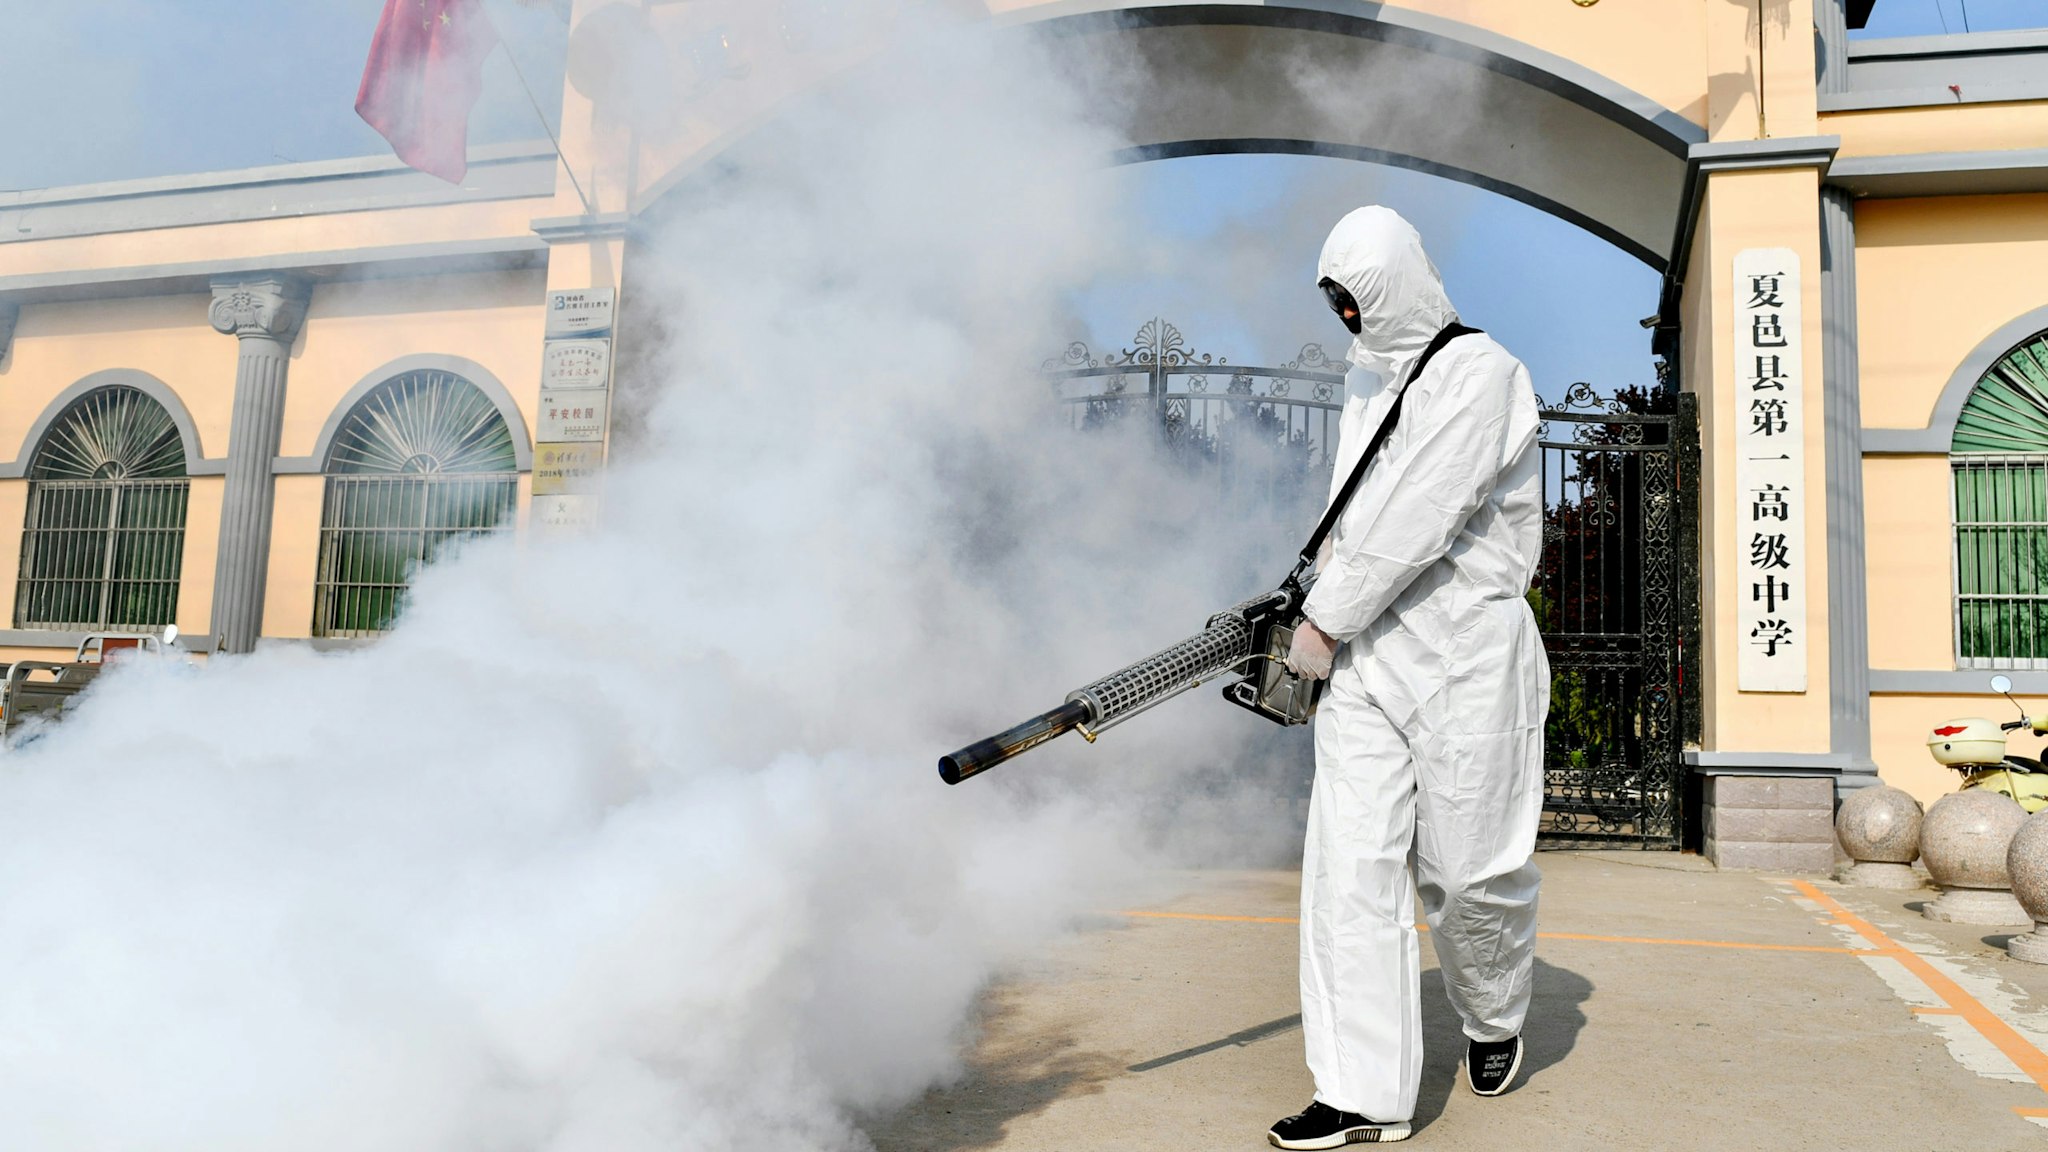 A volunteer sprays disinfectant at a school as the school prepares for students returning after the term opening was delayed due to the COVID-19 coronavirus outbreak, in Shangqiu in China's central Henan province on April 3, 2020.